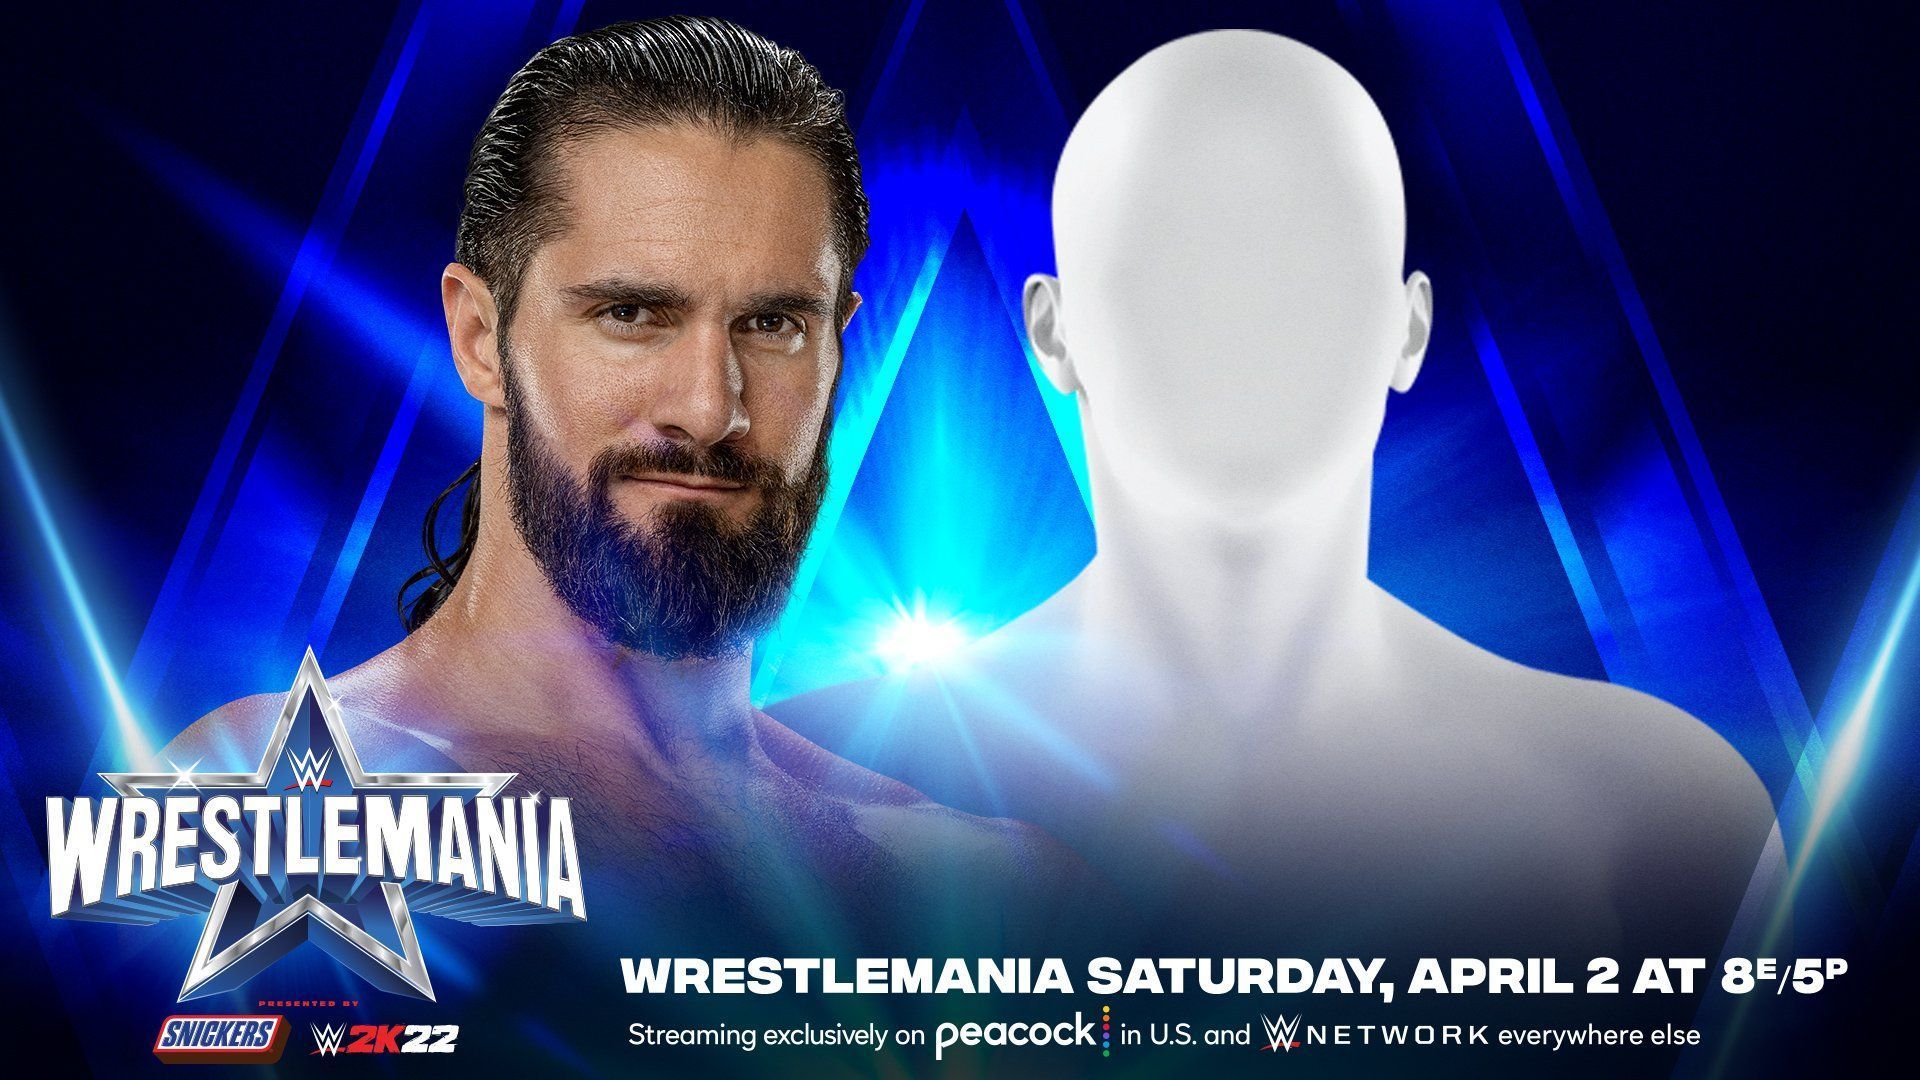 Will Seth Rollins be ready for his surprise opponent at WrestleMania?